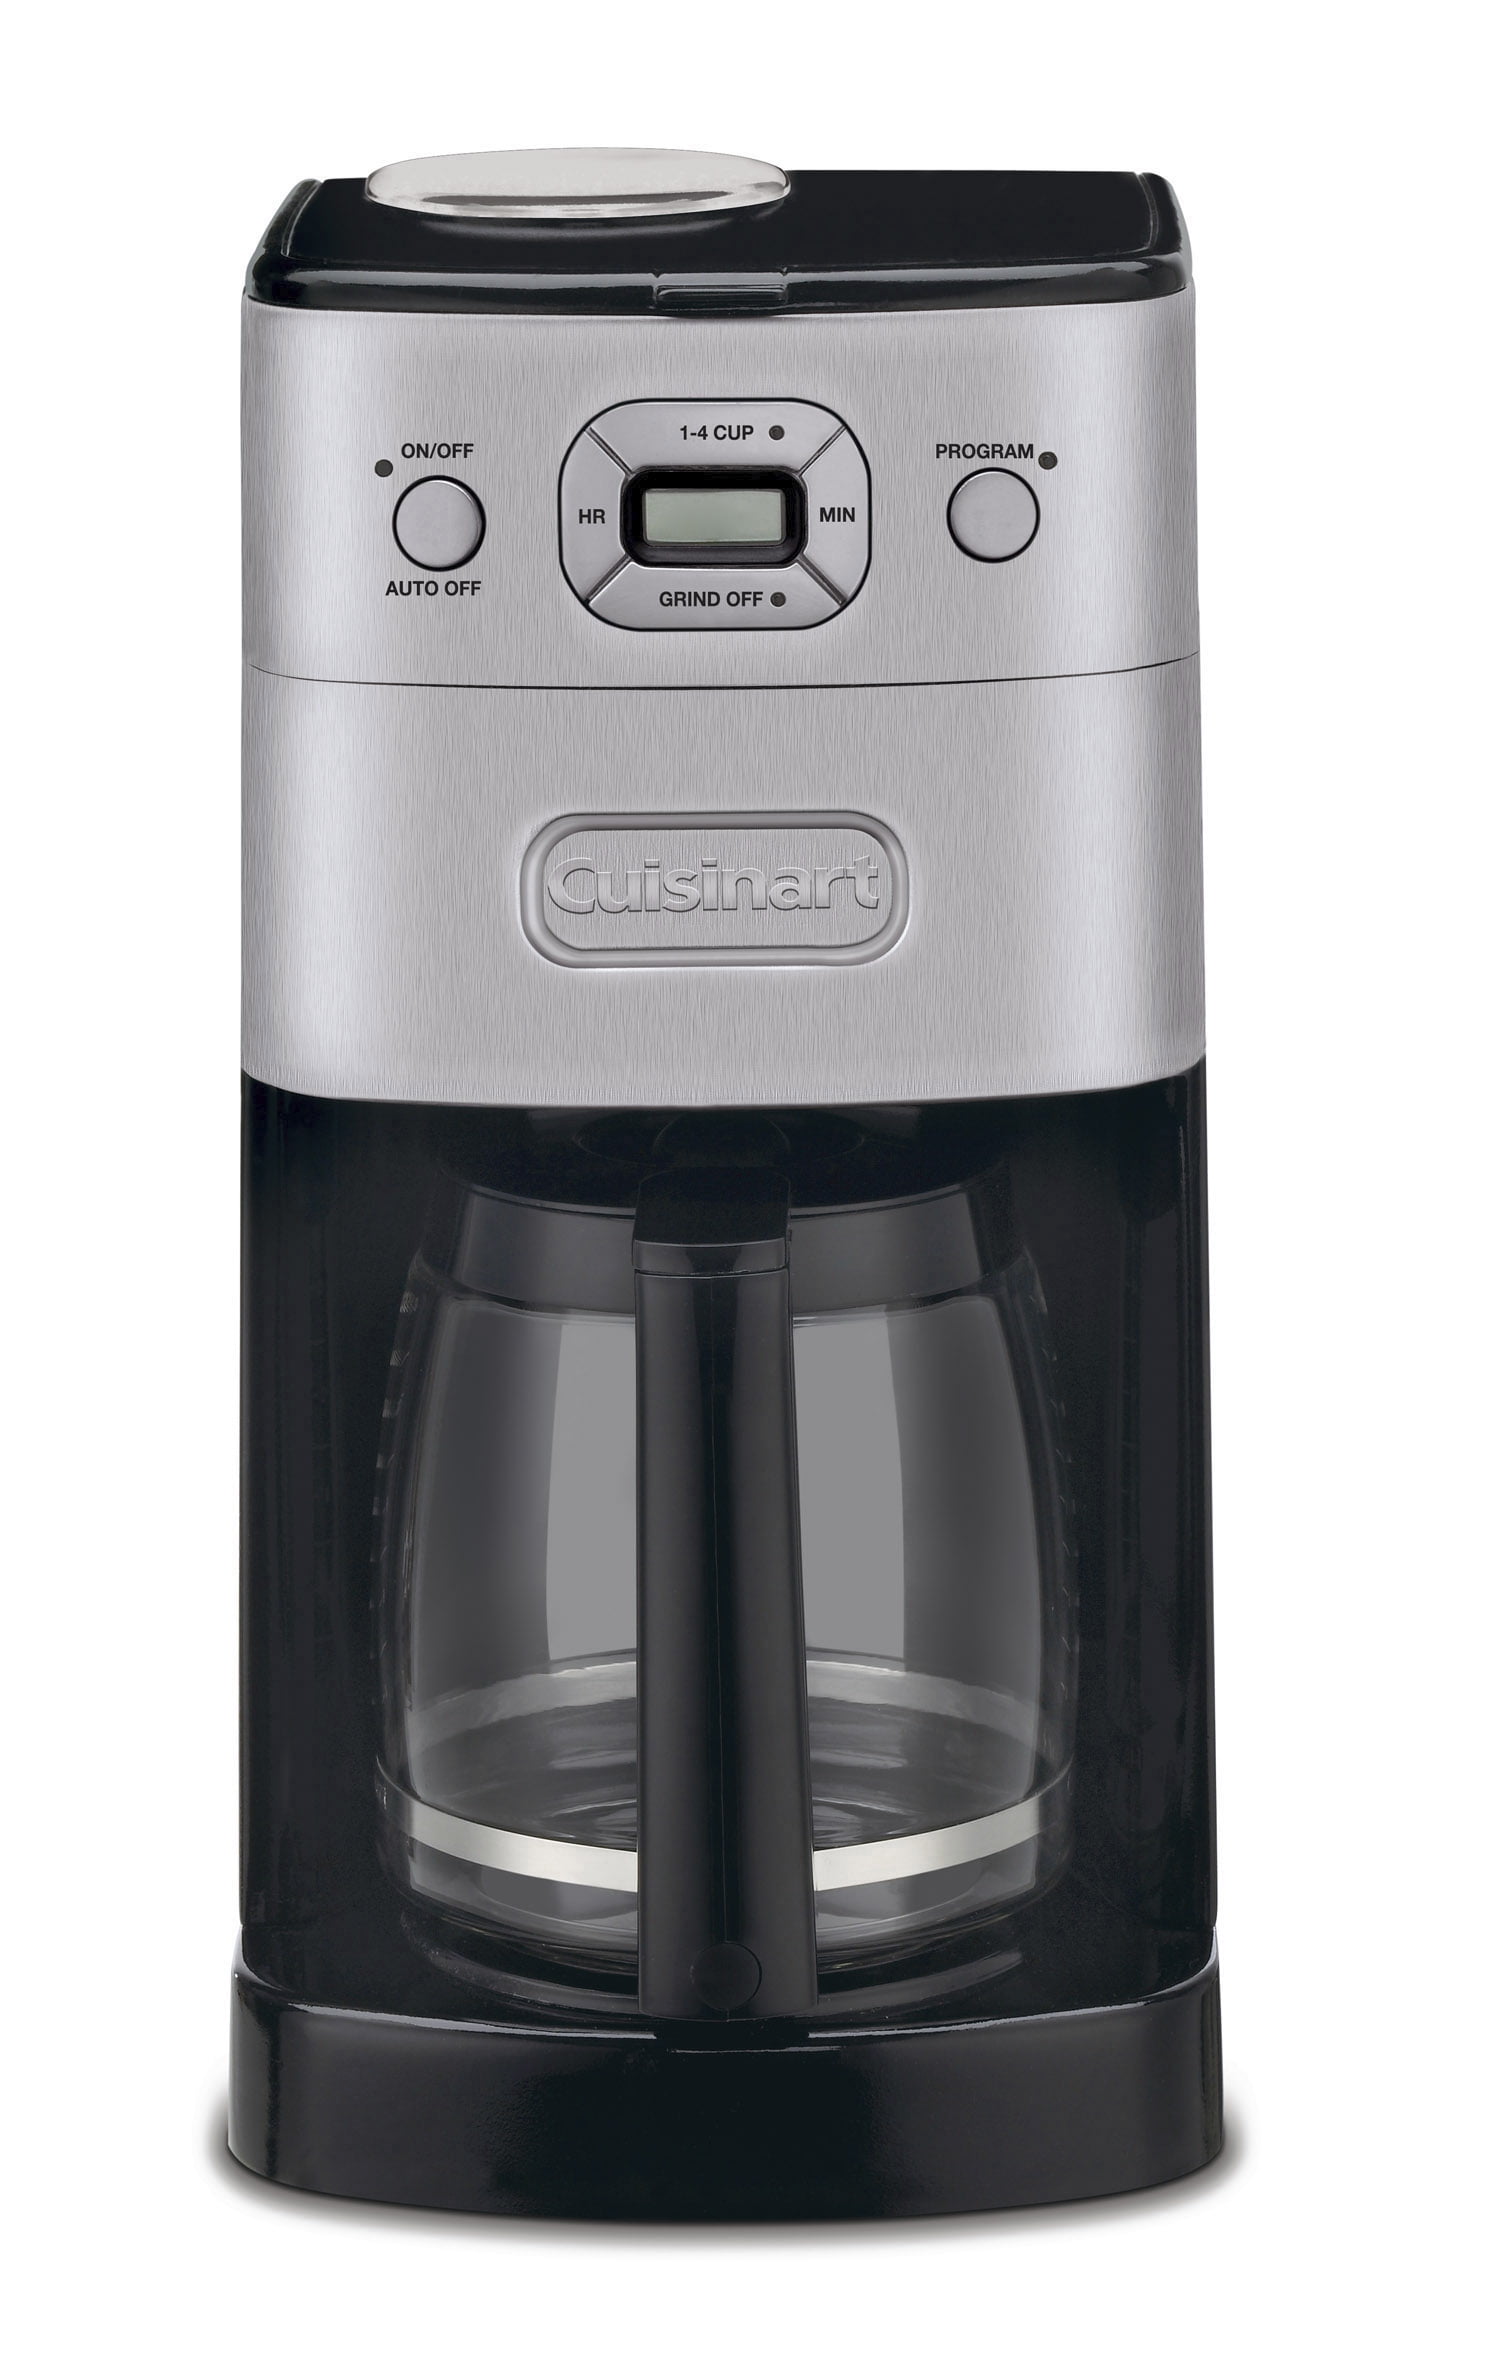 Burr Grind & Brew™ 12 Cup Automatic Coffeemaker